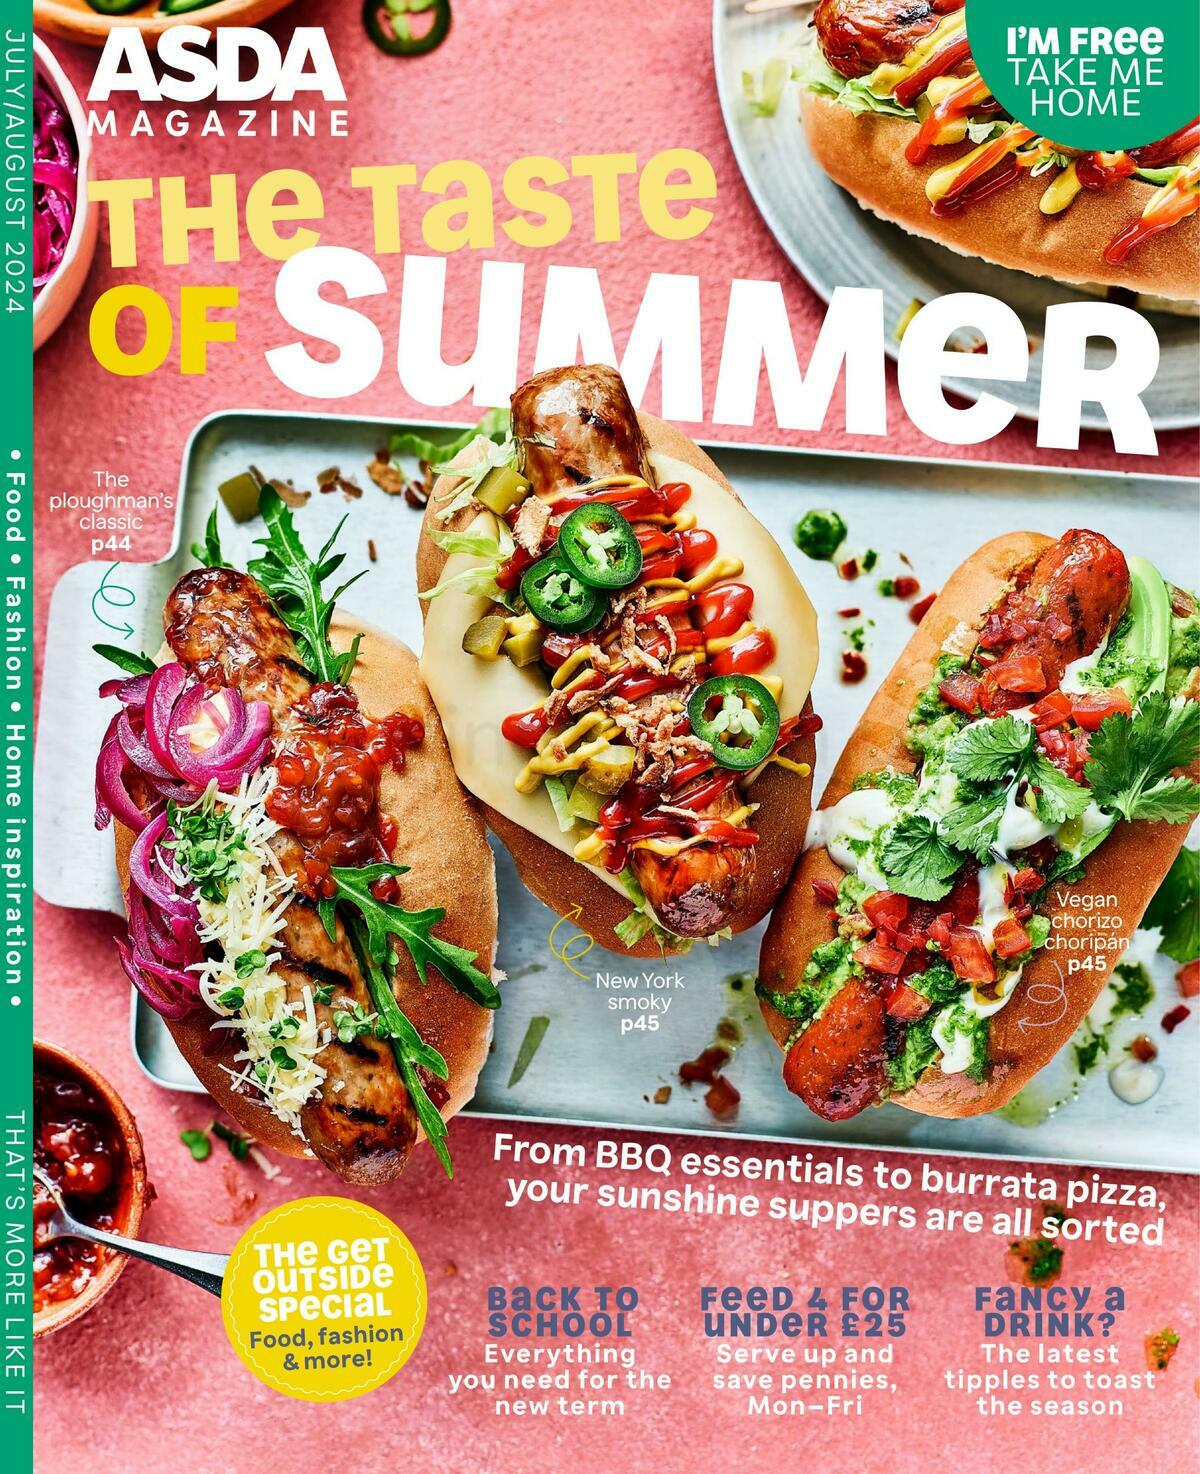 ASDA Magazine July & August Offers from 1 July